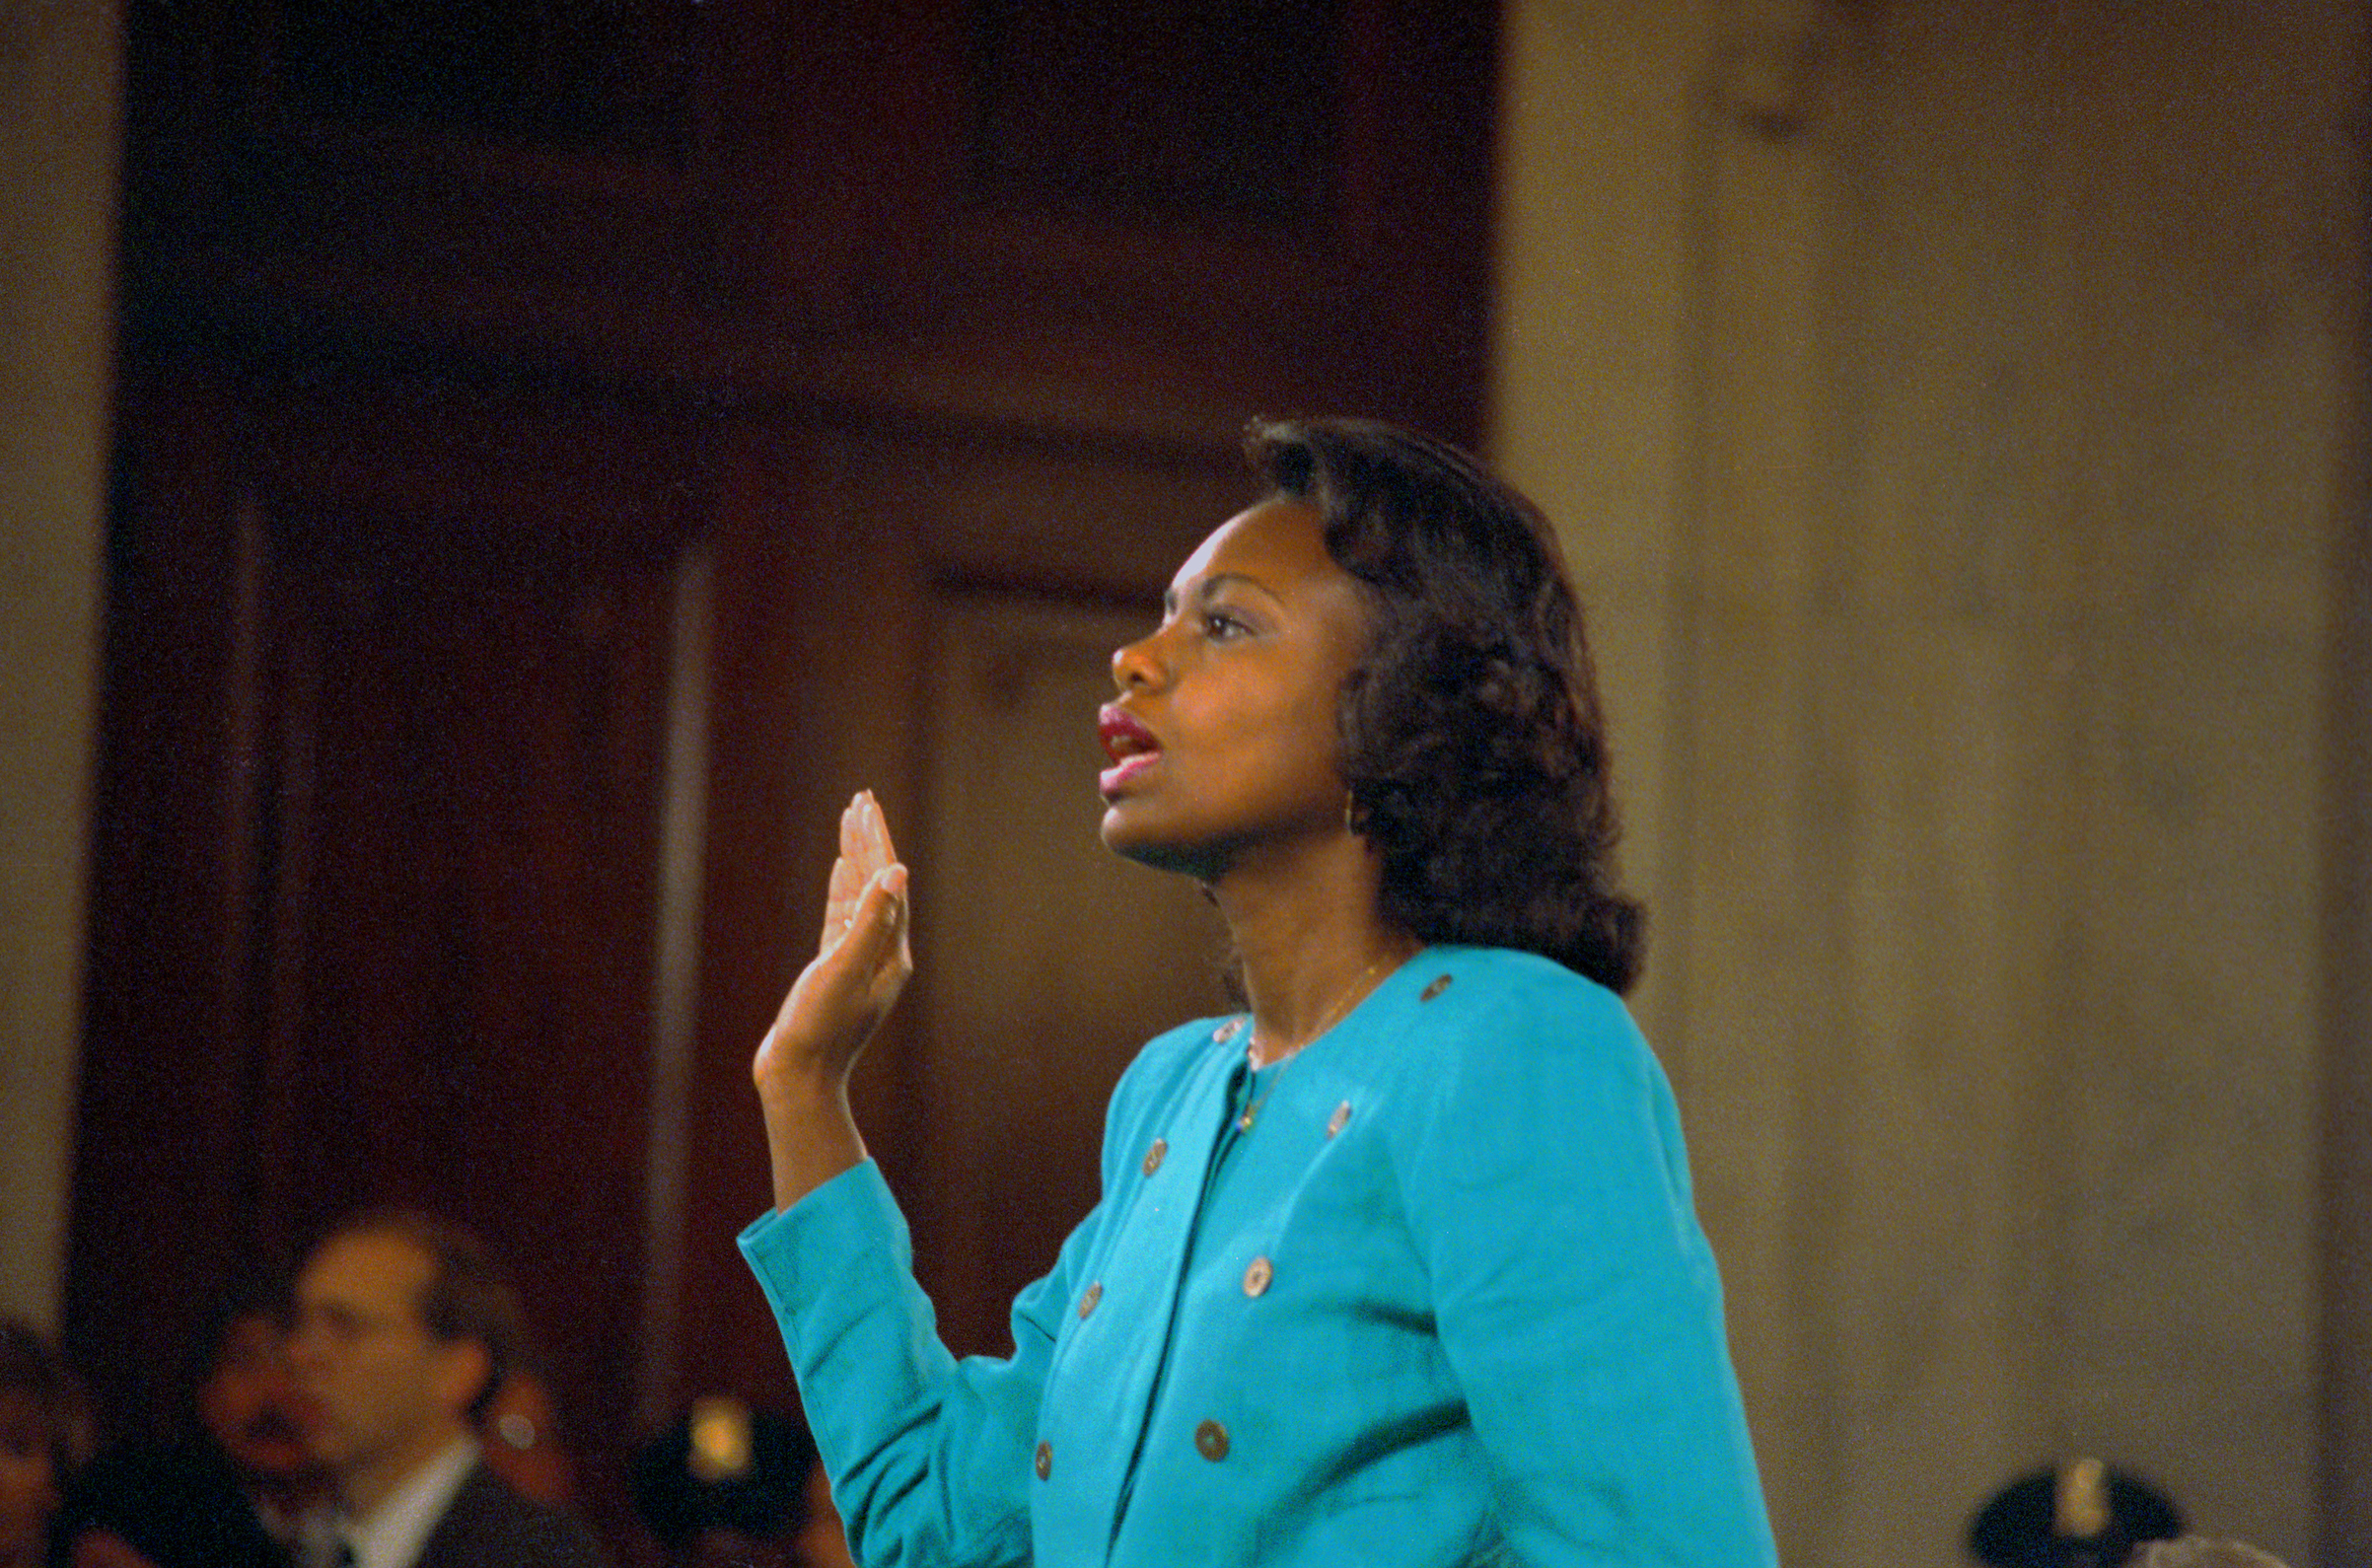 Anita Hill is sworn in before testifying at the Senate Judiciary hearing on the Clarence Thomas Supreme Court nomination in 1991. (Bettmann/Getty Images)